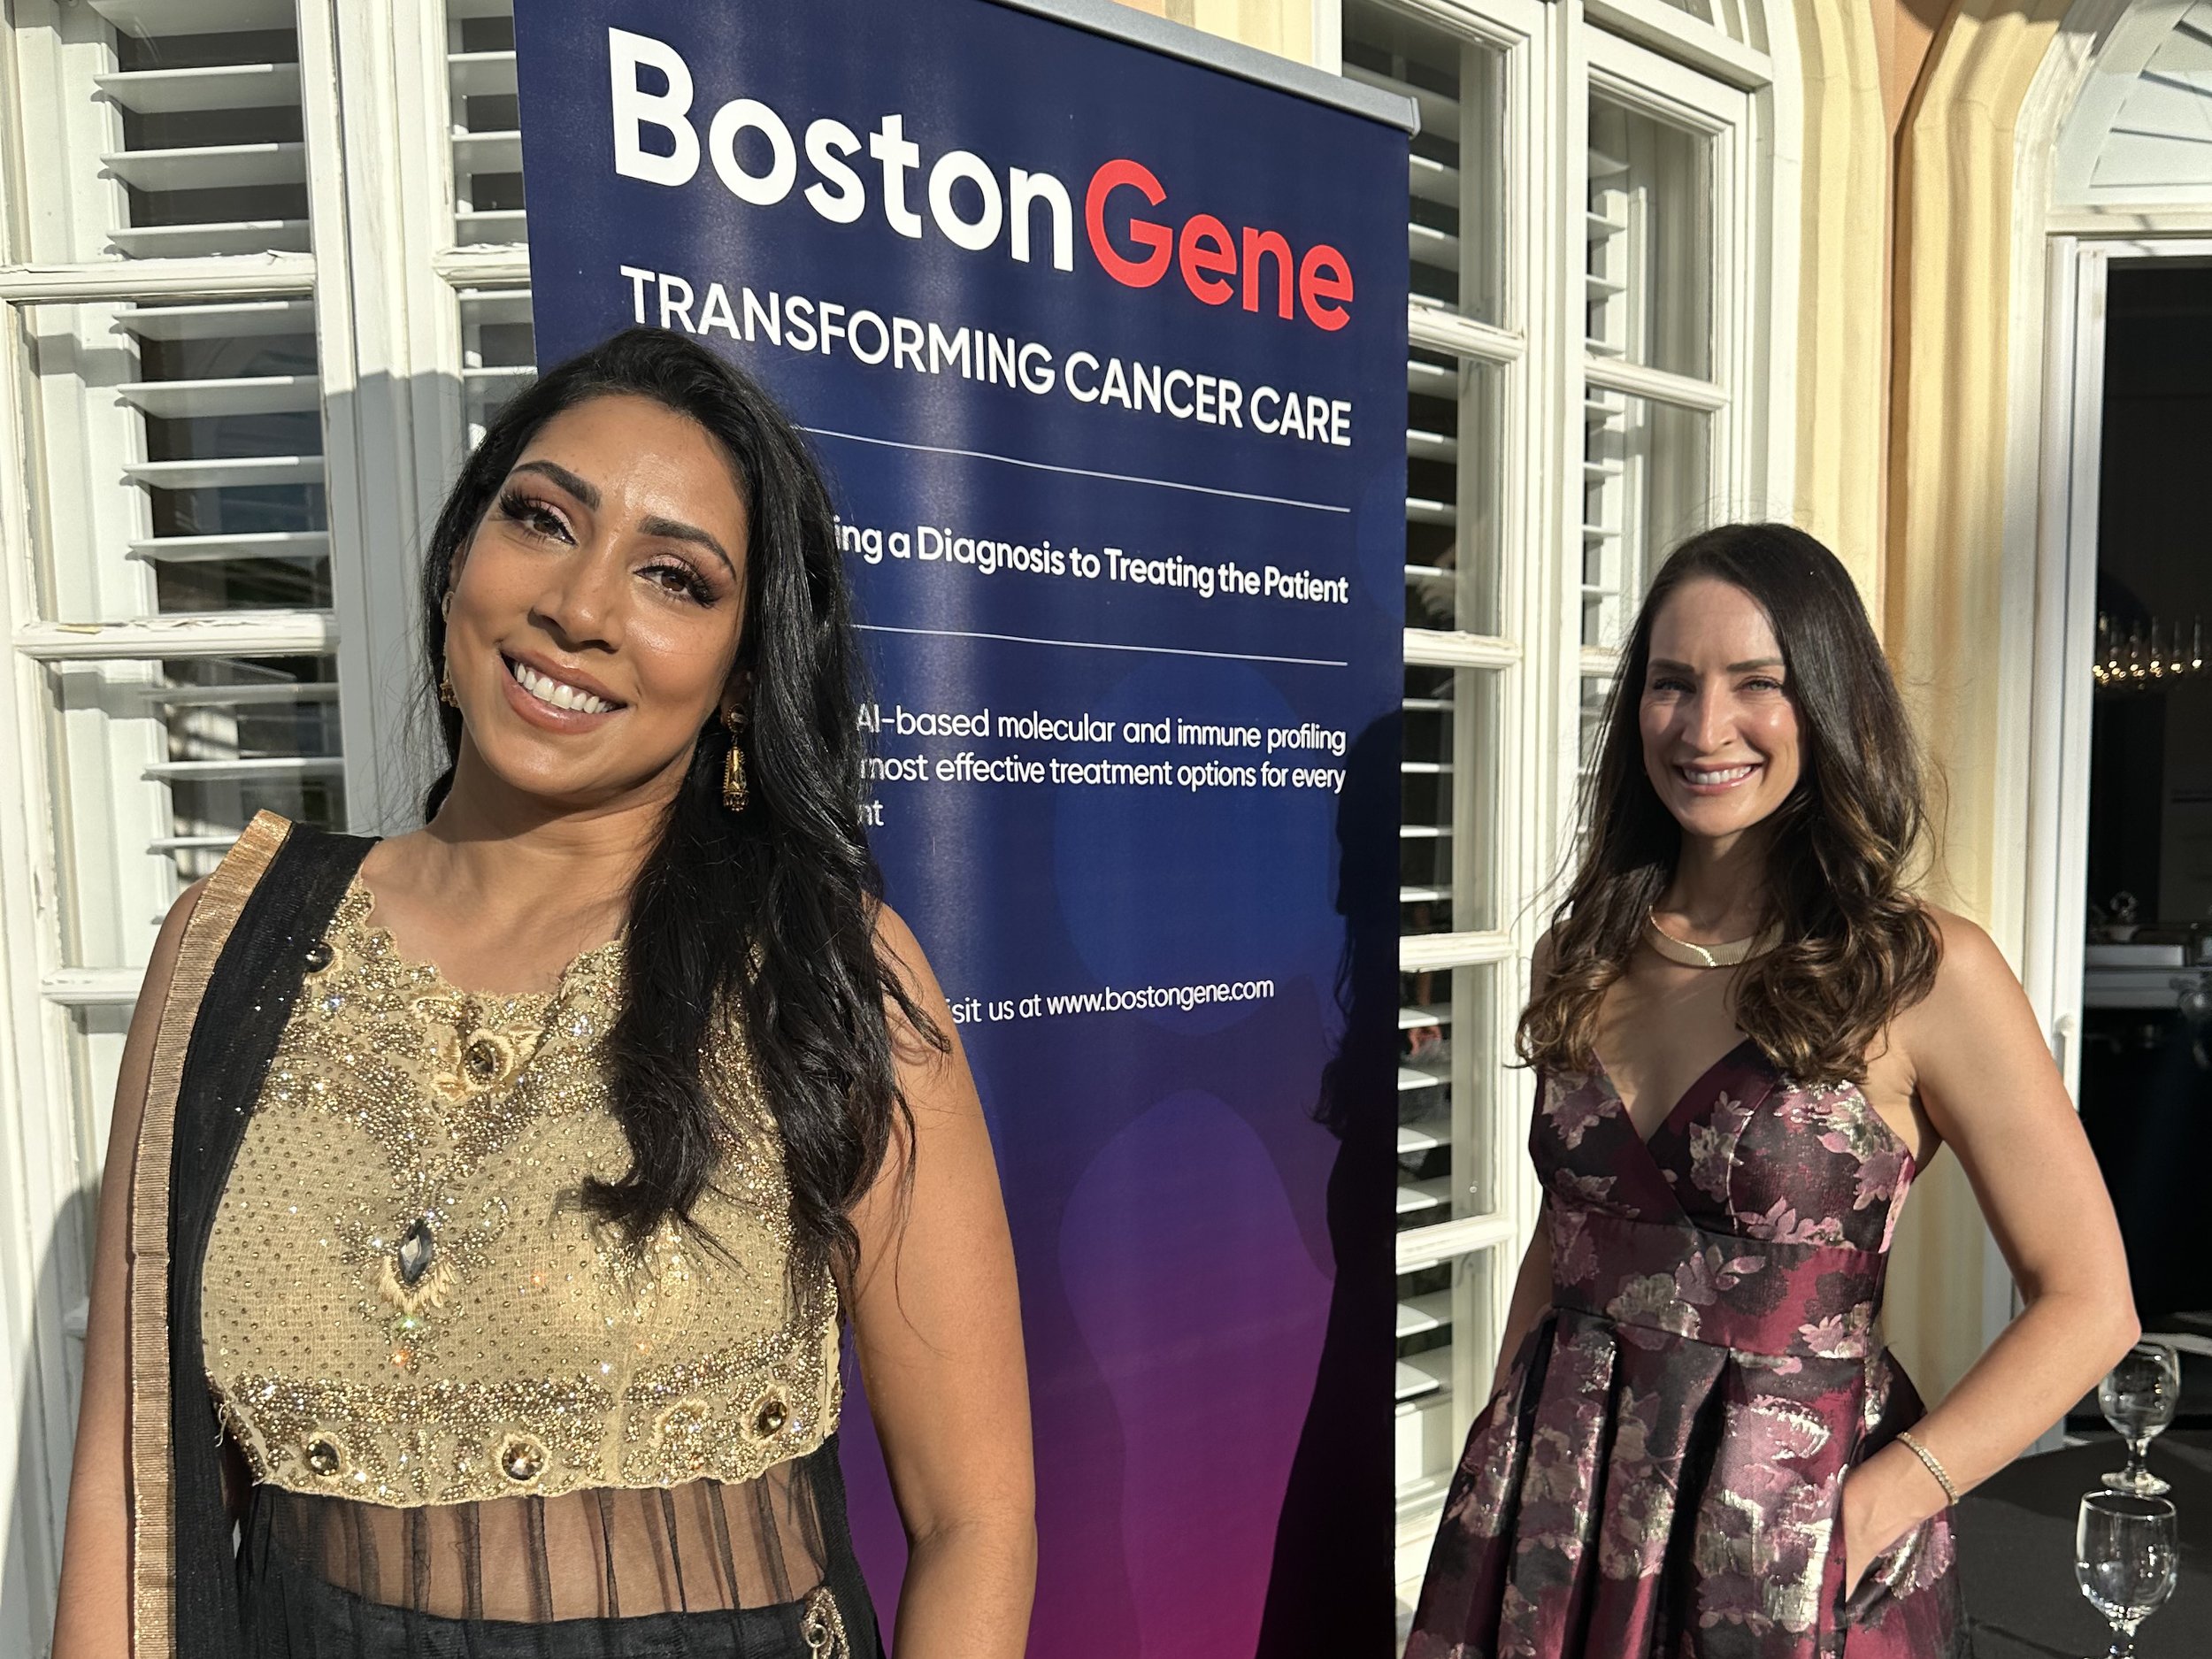 Thank you Rheanna and Michelle of BostonGene for your support in gaining FDA authorization for DeltaRex-G as platform therapy for cancer